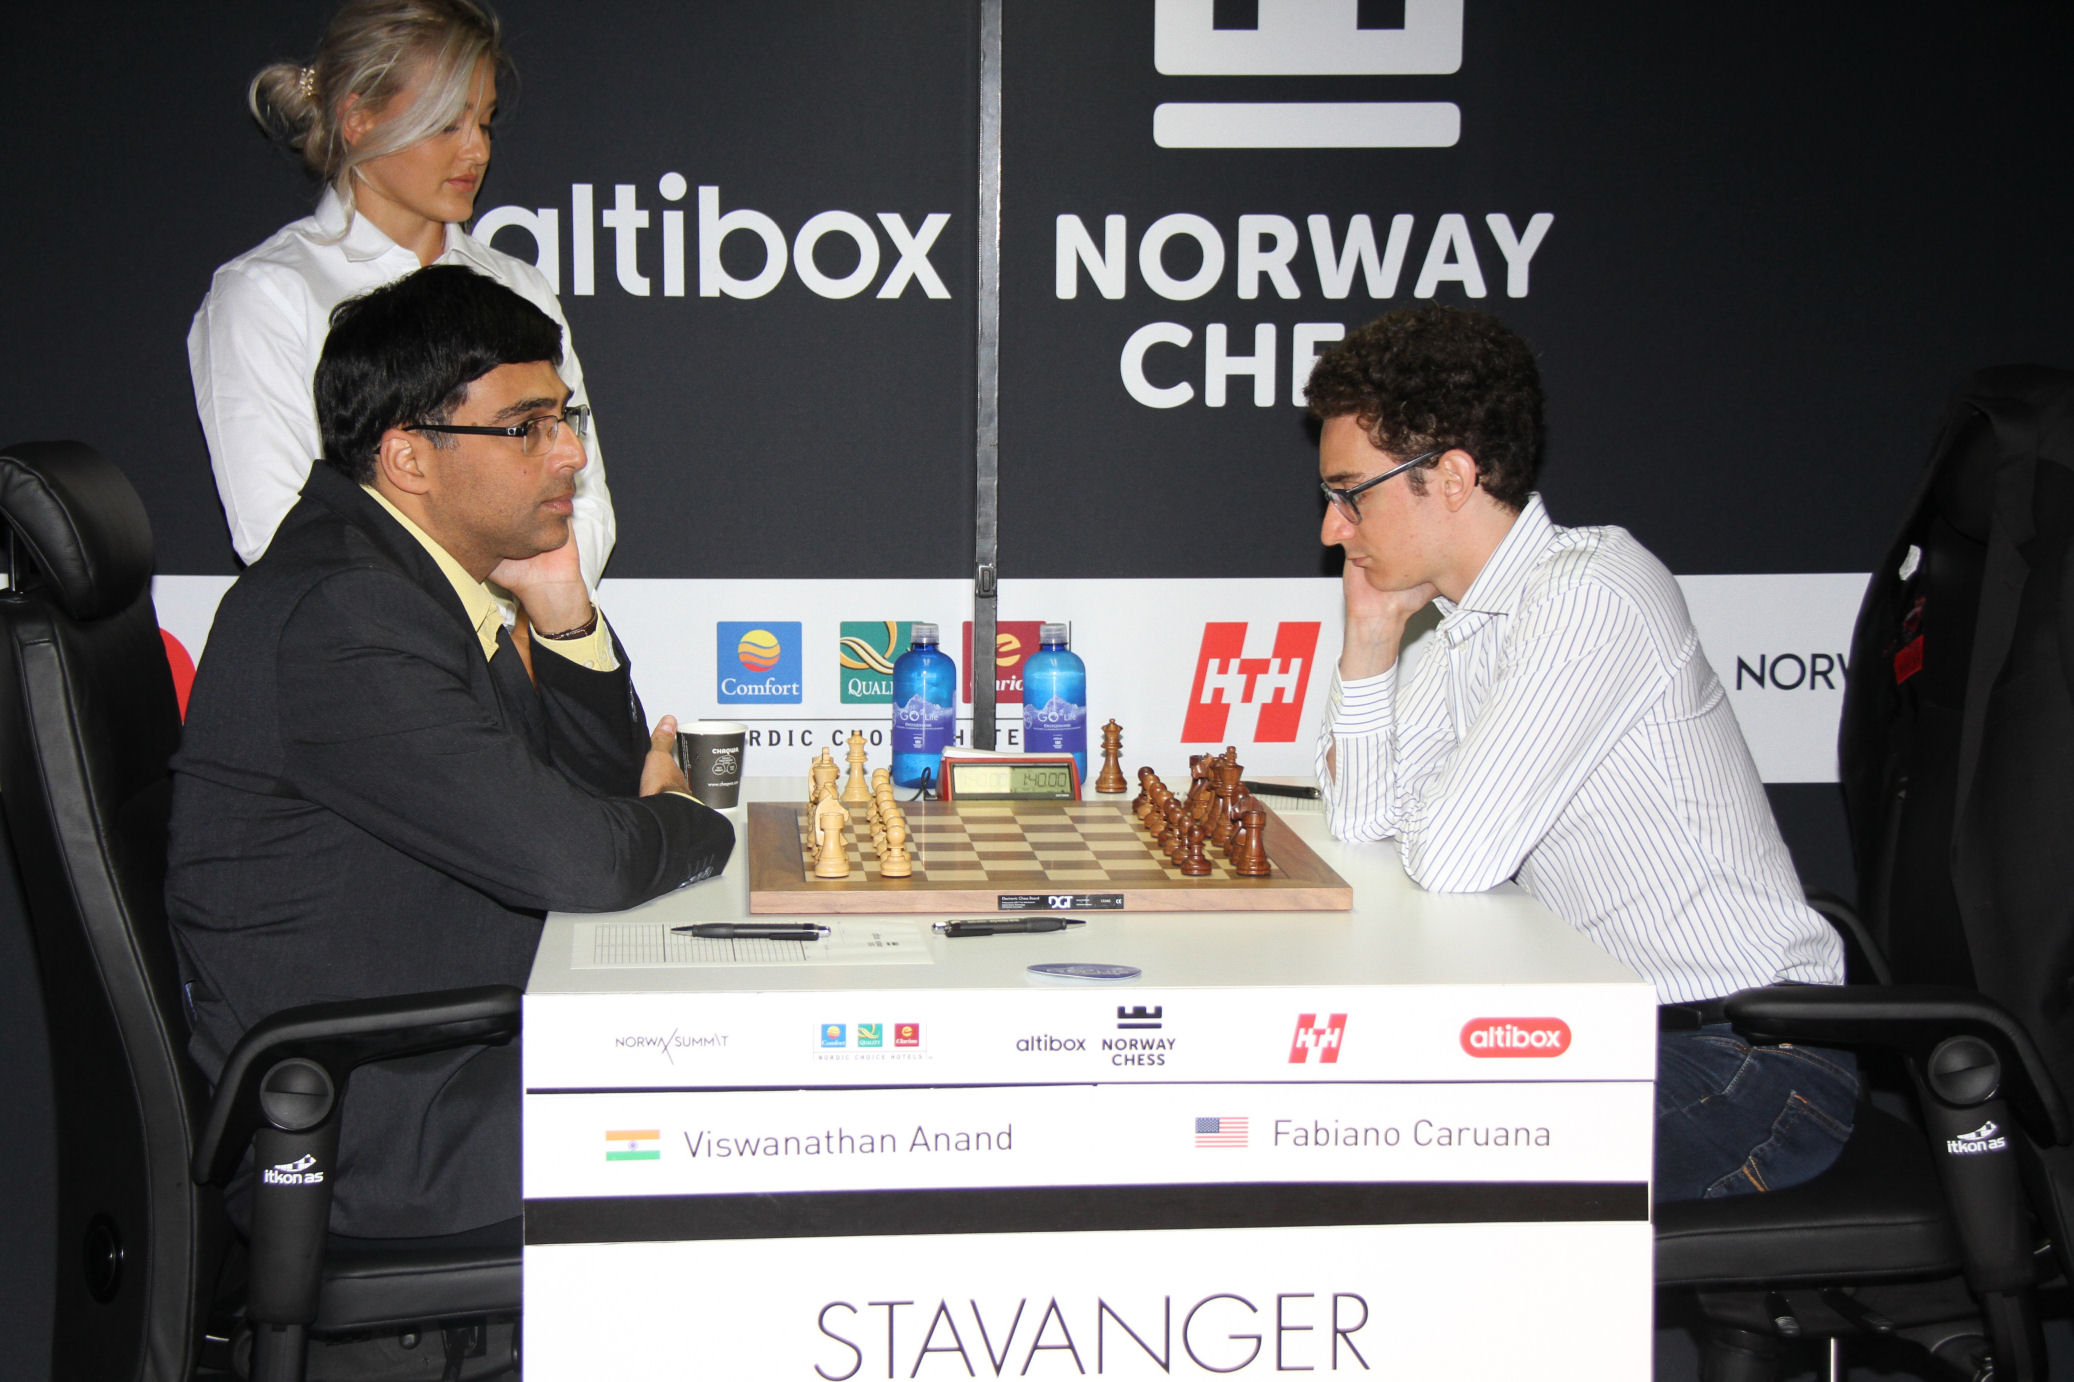 Norway Chess 8: Carlsen escapes as Anand blunders